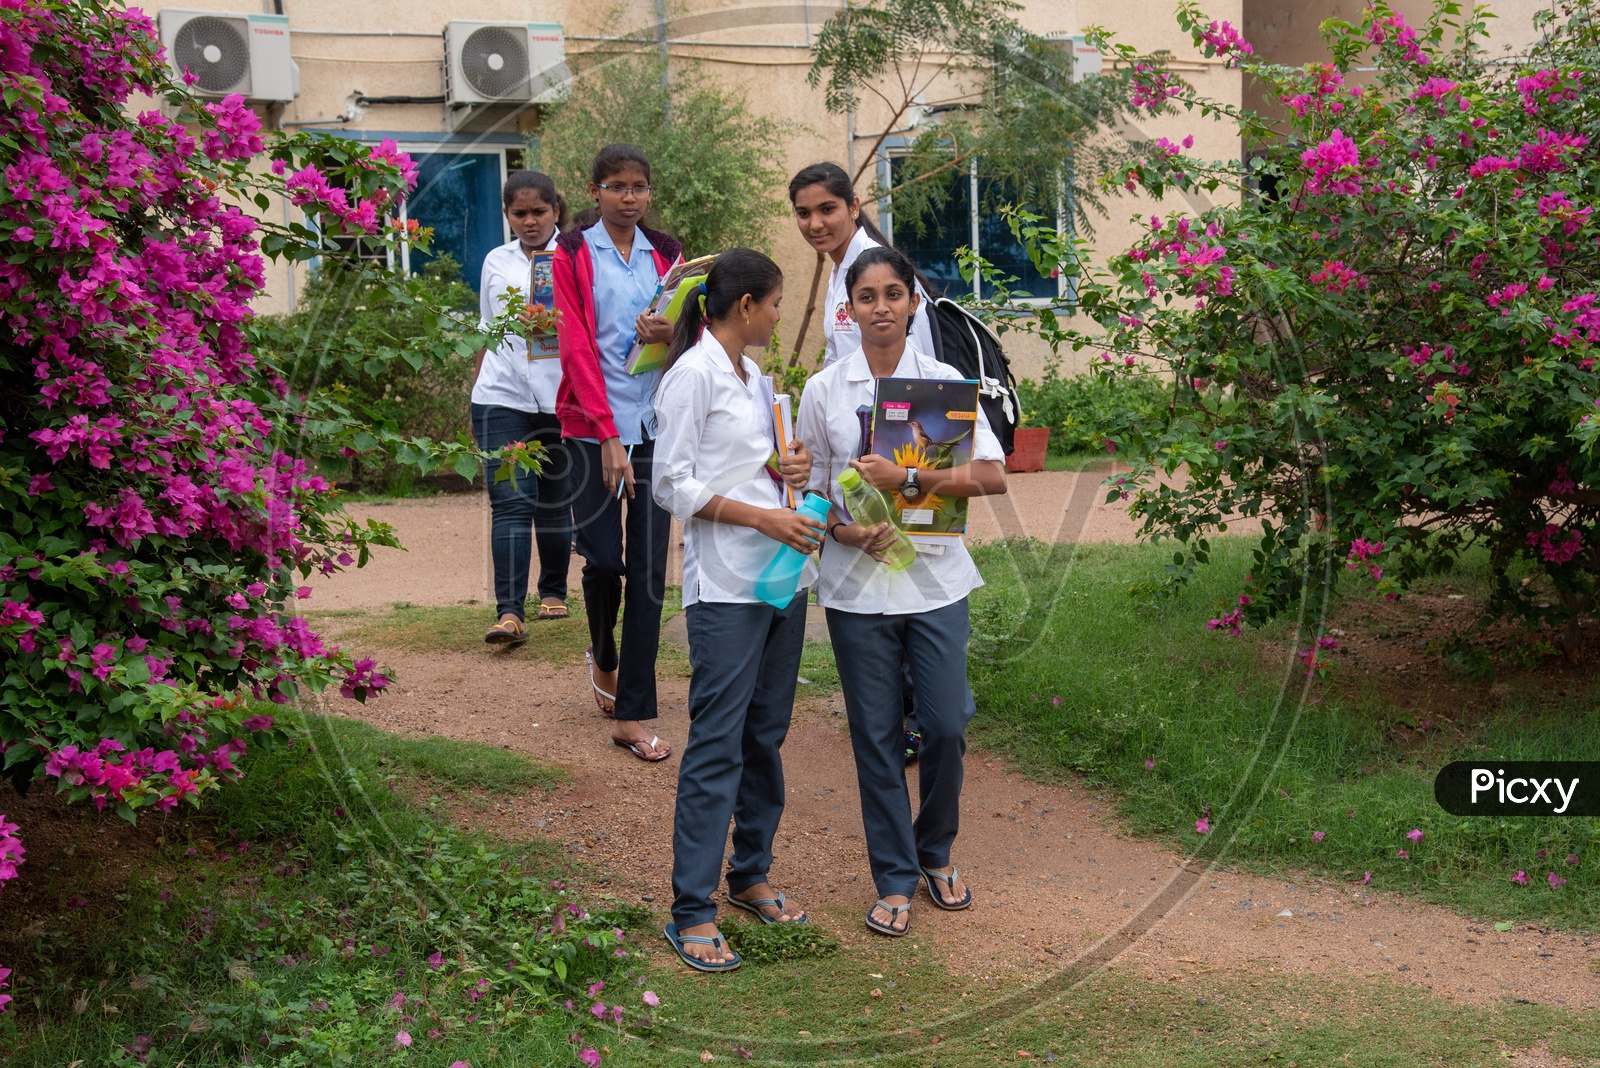 Students heading to examination hall at an Educational Institute in Hyderabad